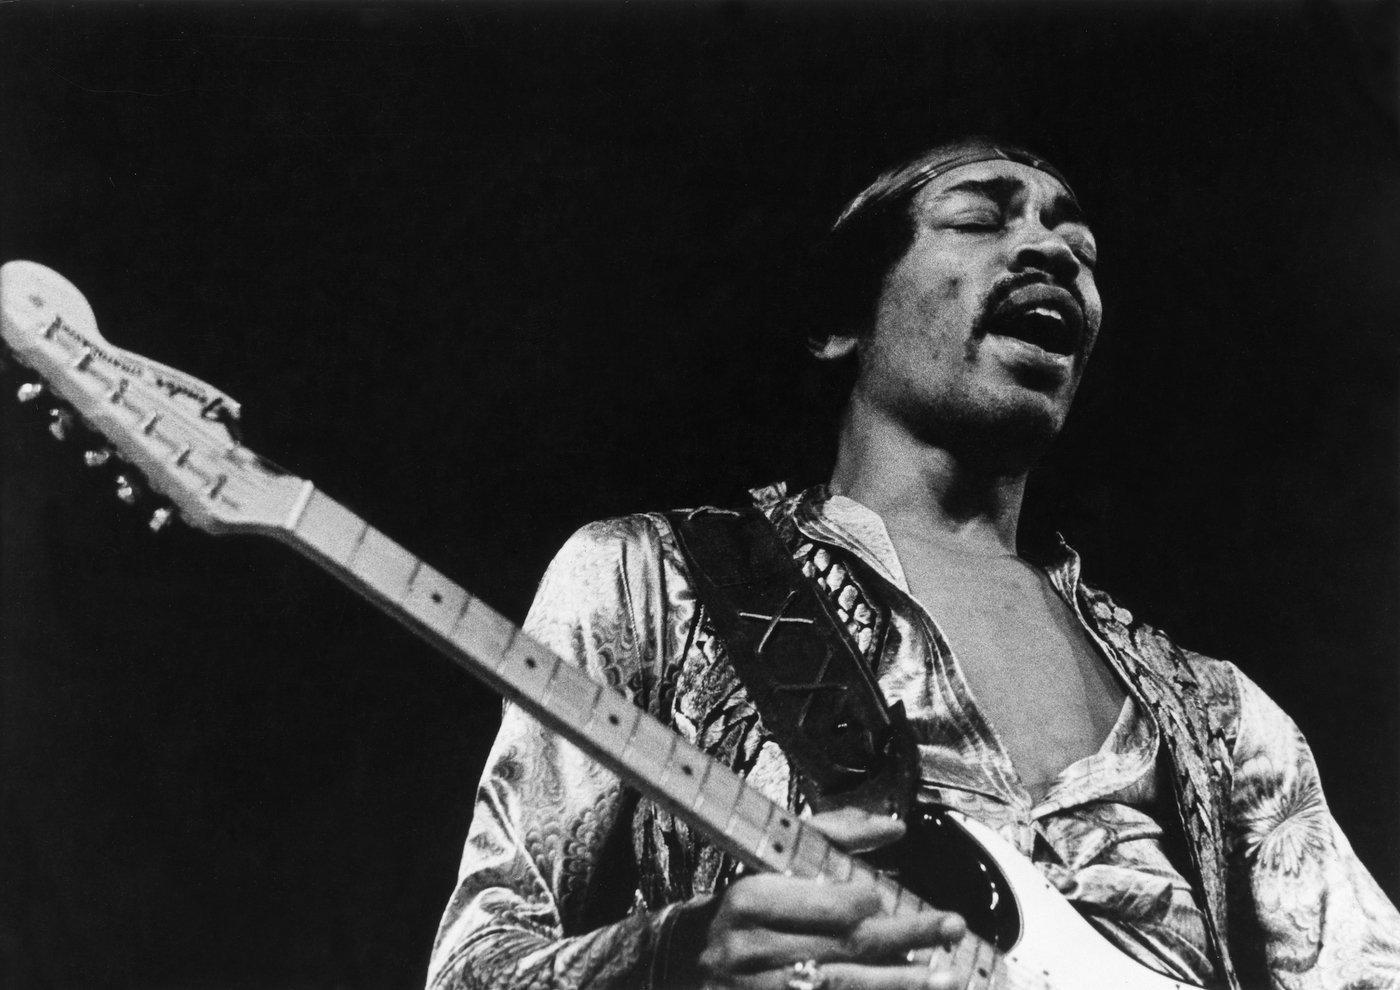 How Jimi Hendrix Came to Own His First Electric Guitar